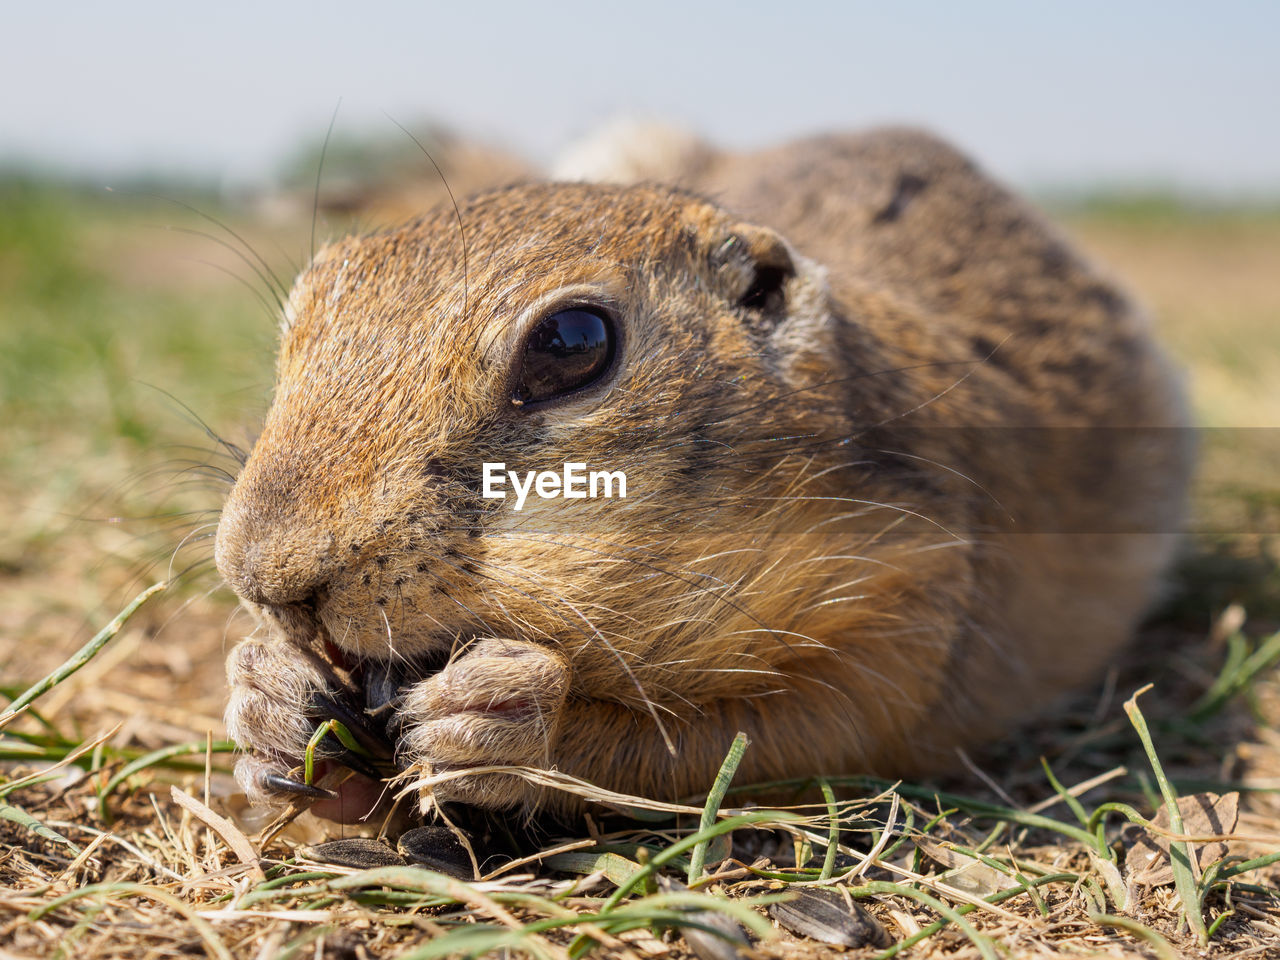 animal, animal themes, animal wildlife, one animal, mammal, whiskers, wildlife, prairie dog, nature, no people, rodent, grass, close-up, squirrel, portrait, day, outdoors, eating, plant, animal body part